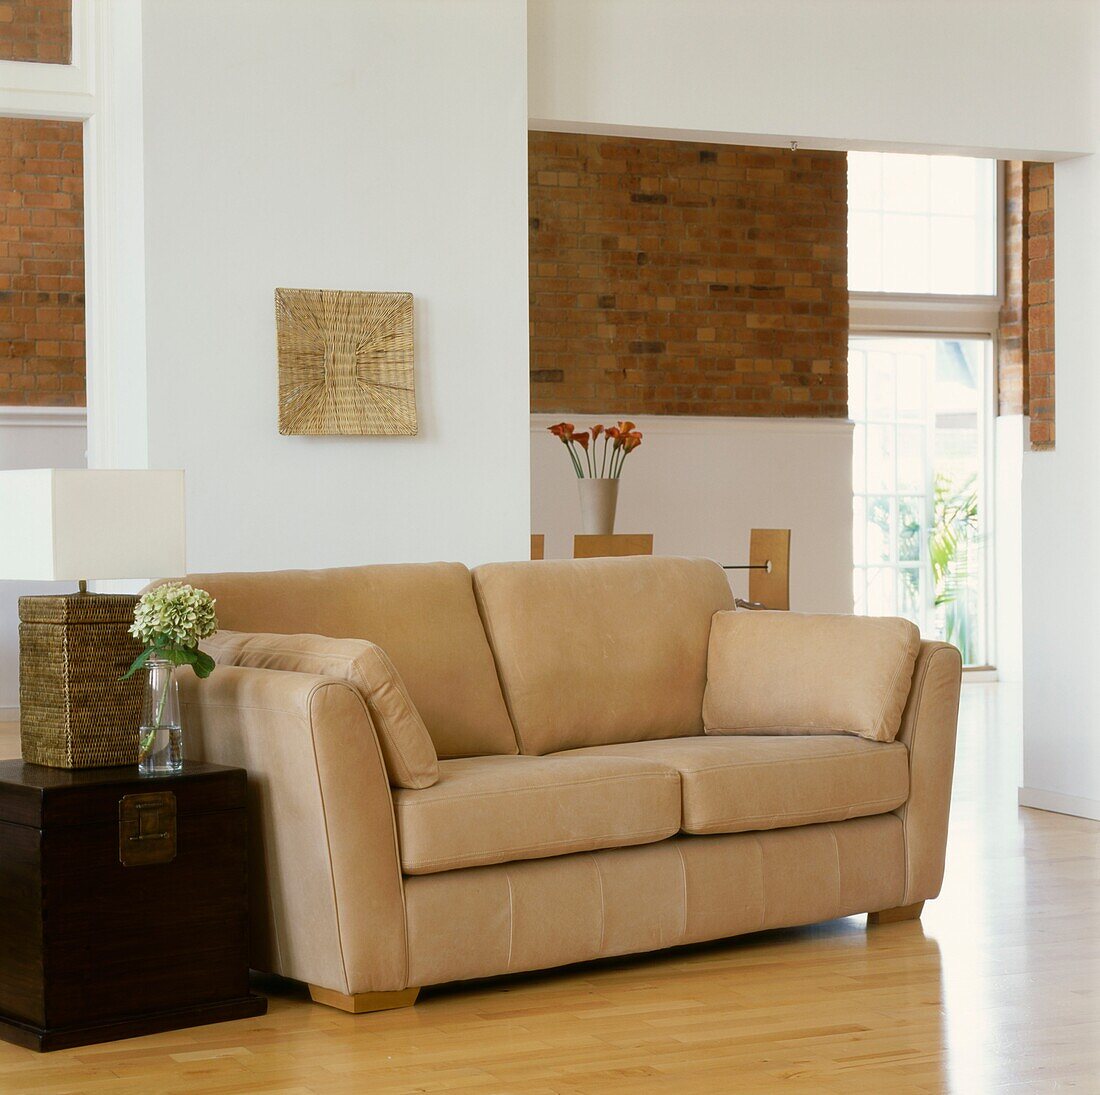 beige sofa with chest as side table in living room with exposed brick feature wall